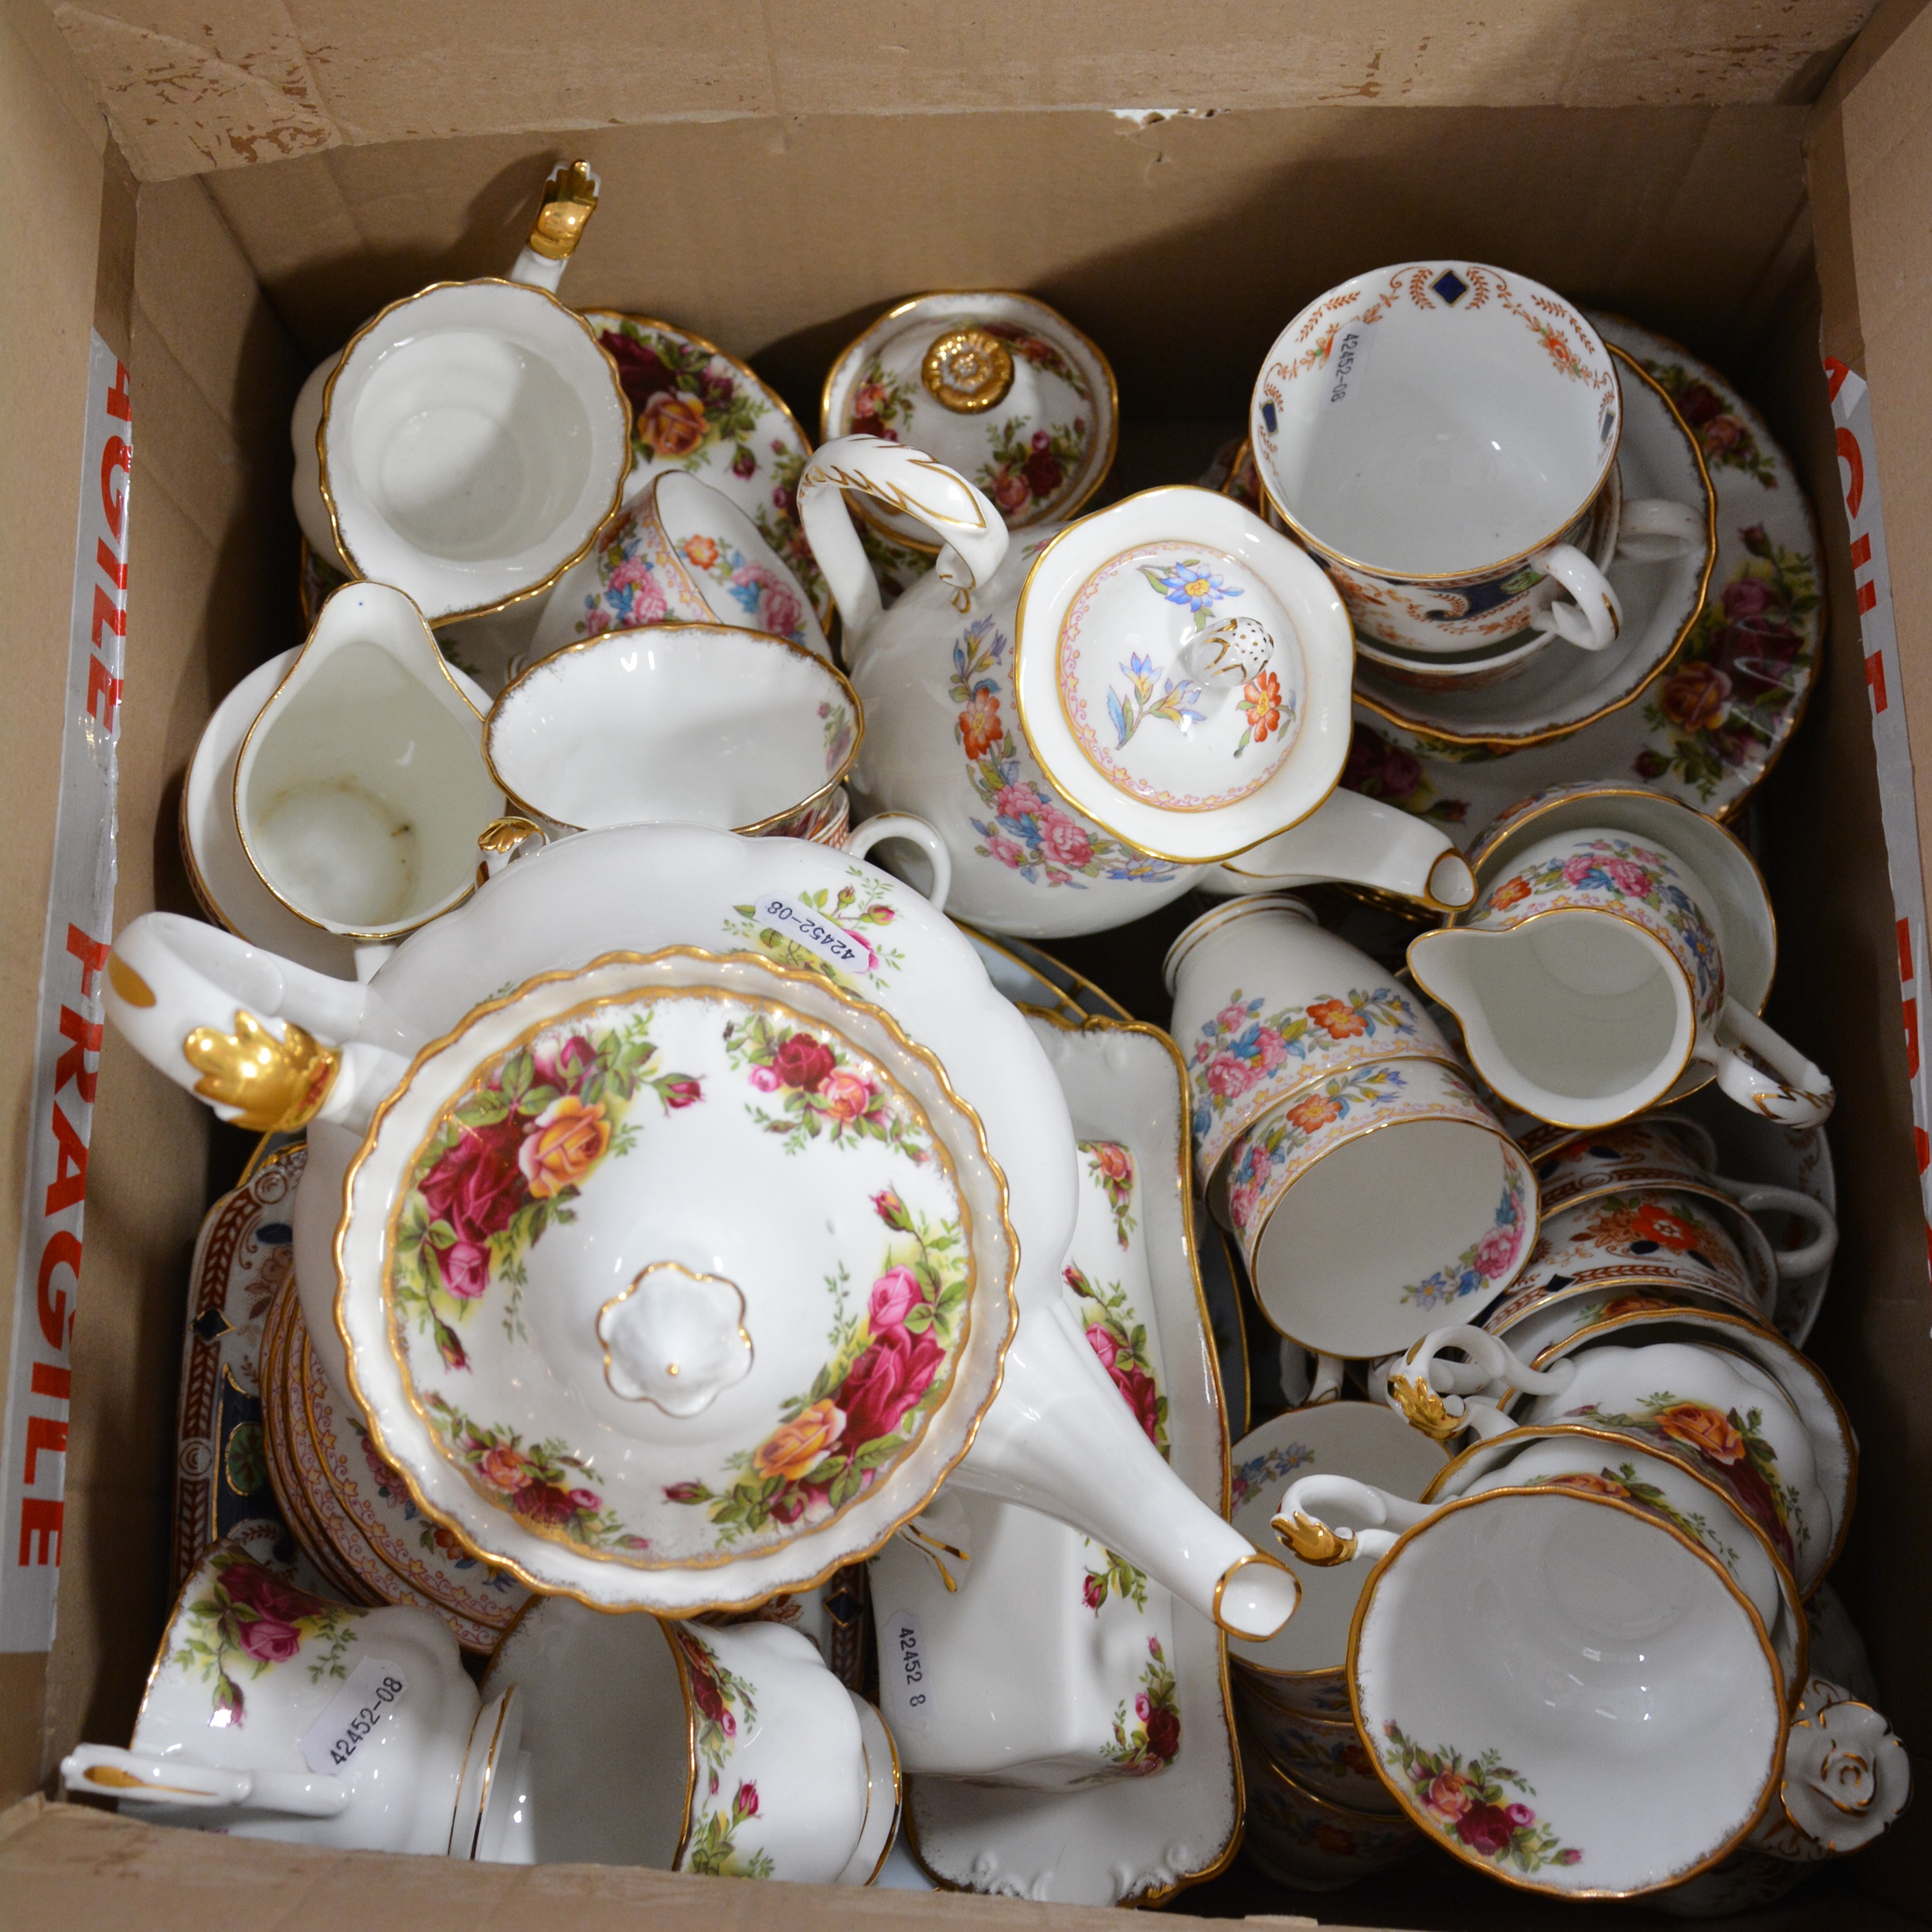 Royal Albert 'Old Country Roses' teaset, Royal Grafton coffee set, and other teasets. - Image 3 of 4